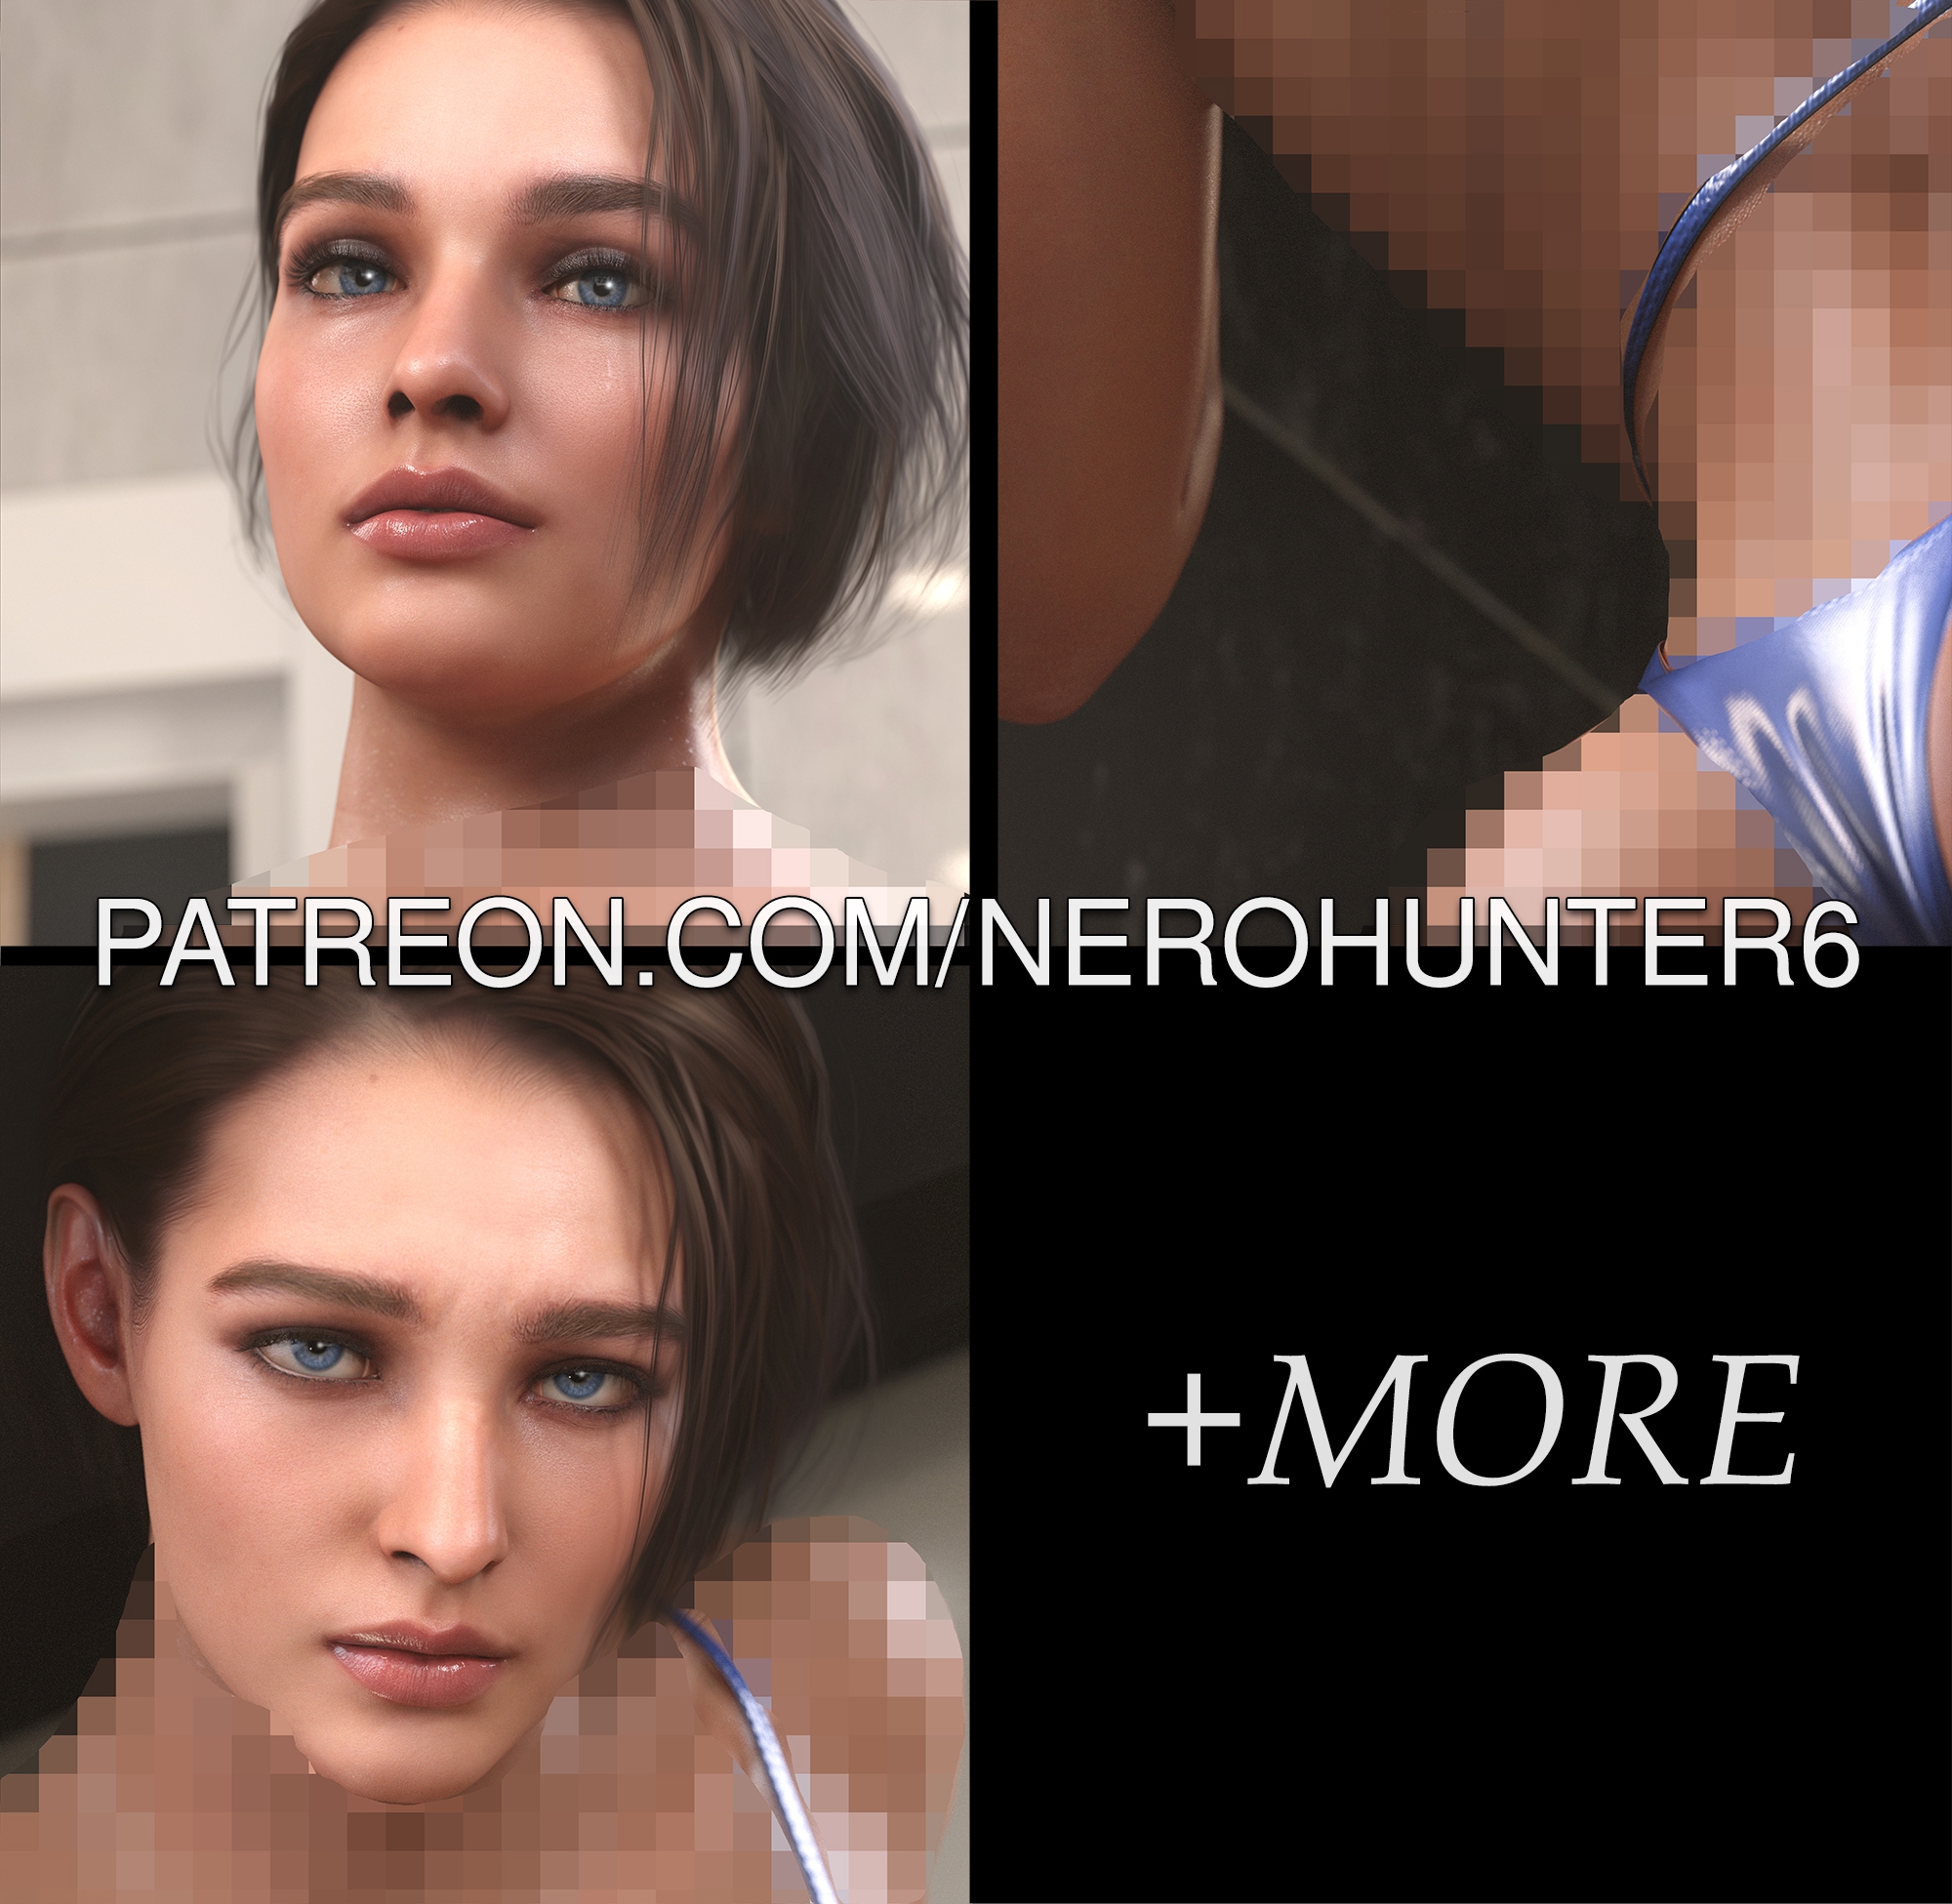 Full set (nude + alts  🍑 view + POV) exclusively on Patreon 
https://www.patreon.com/NeroHunter6
My  other socials:
https://linktr.ee/nerohunter6